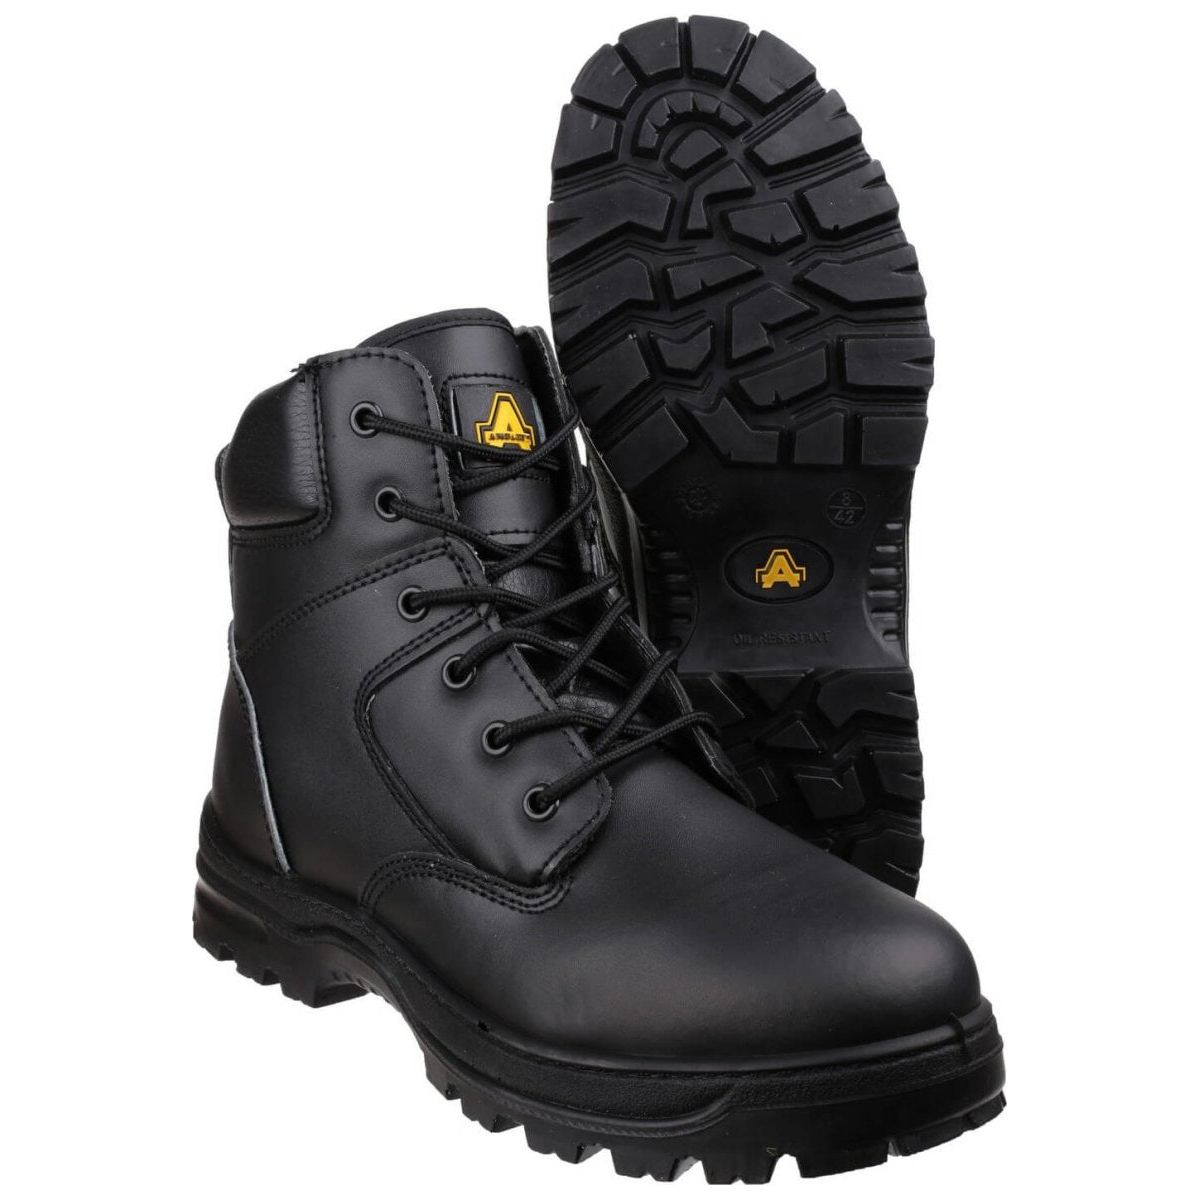 Amblers Fs84 Antistatic Lace Up Safety Boots Womens - workweargurus.com